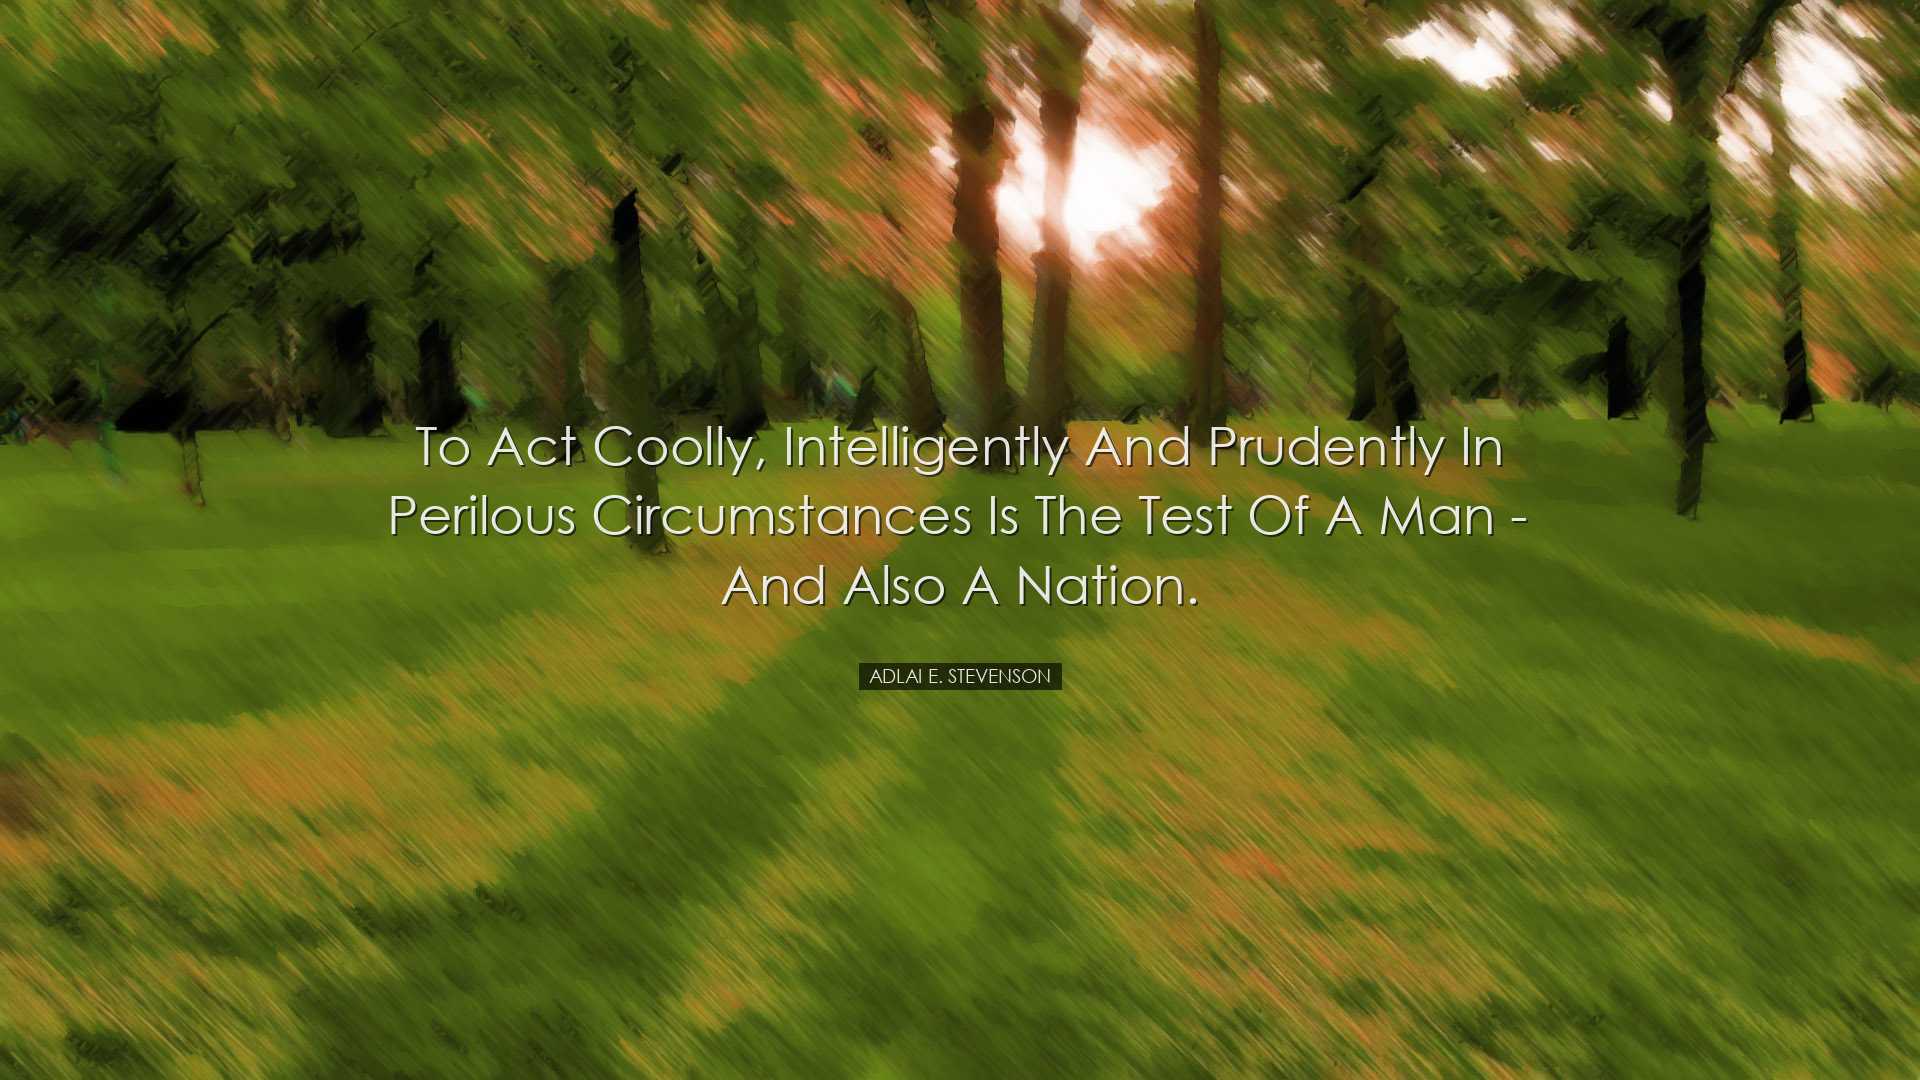 To act coolly, intelligently and prudently in perilous circumstanc